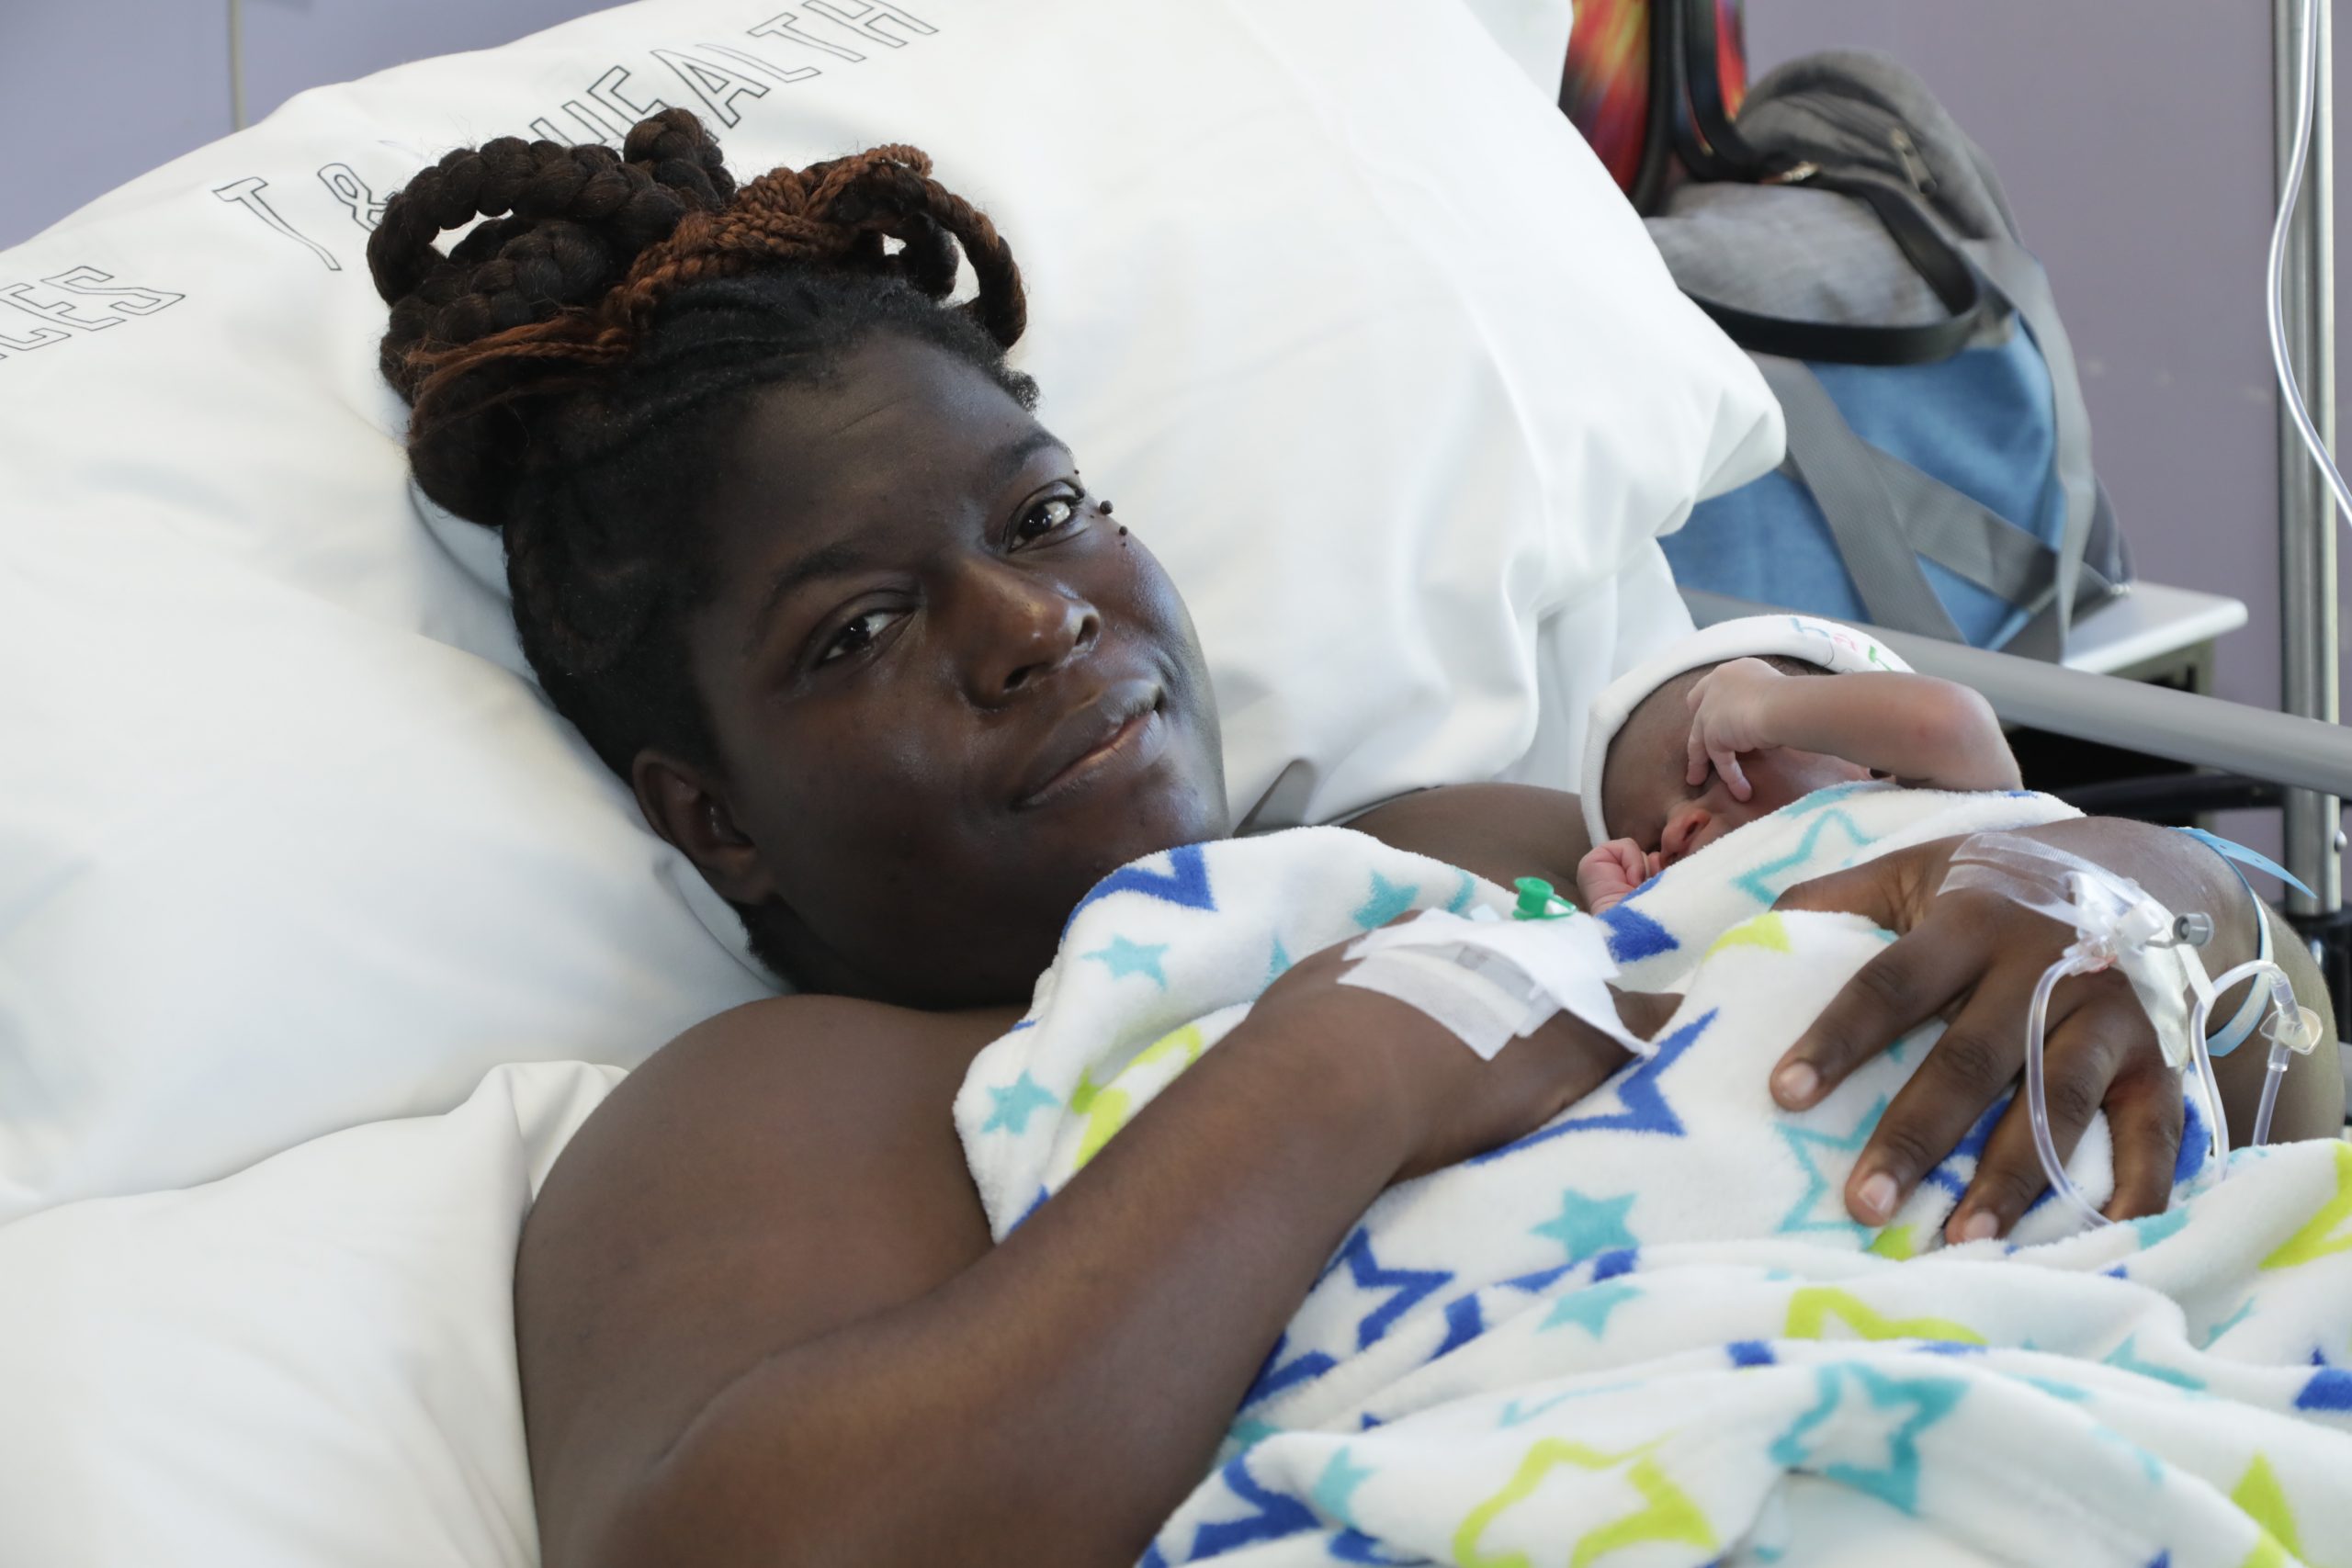 One Tobagonian mother had her first child on a Christmas Day